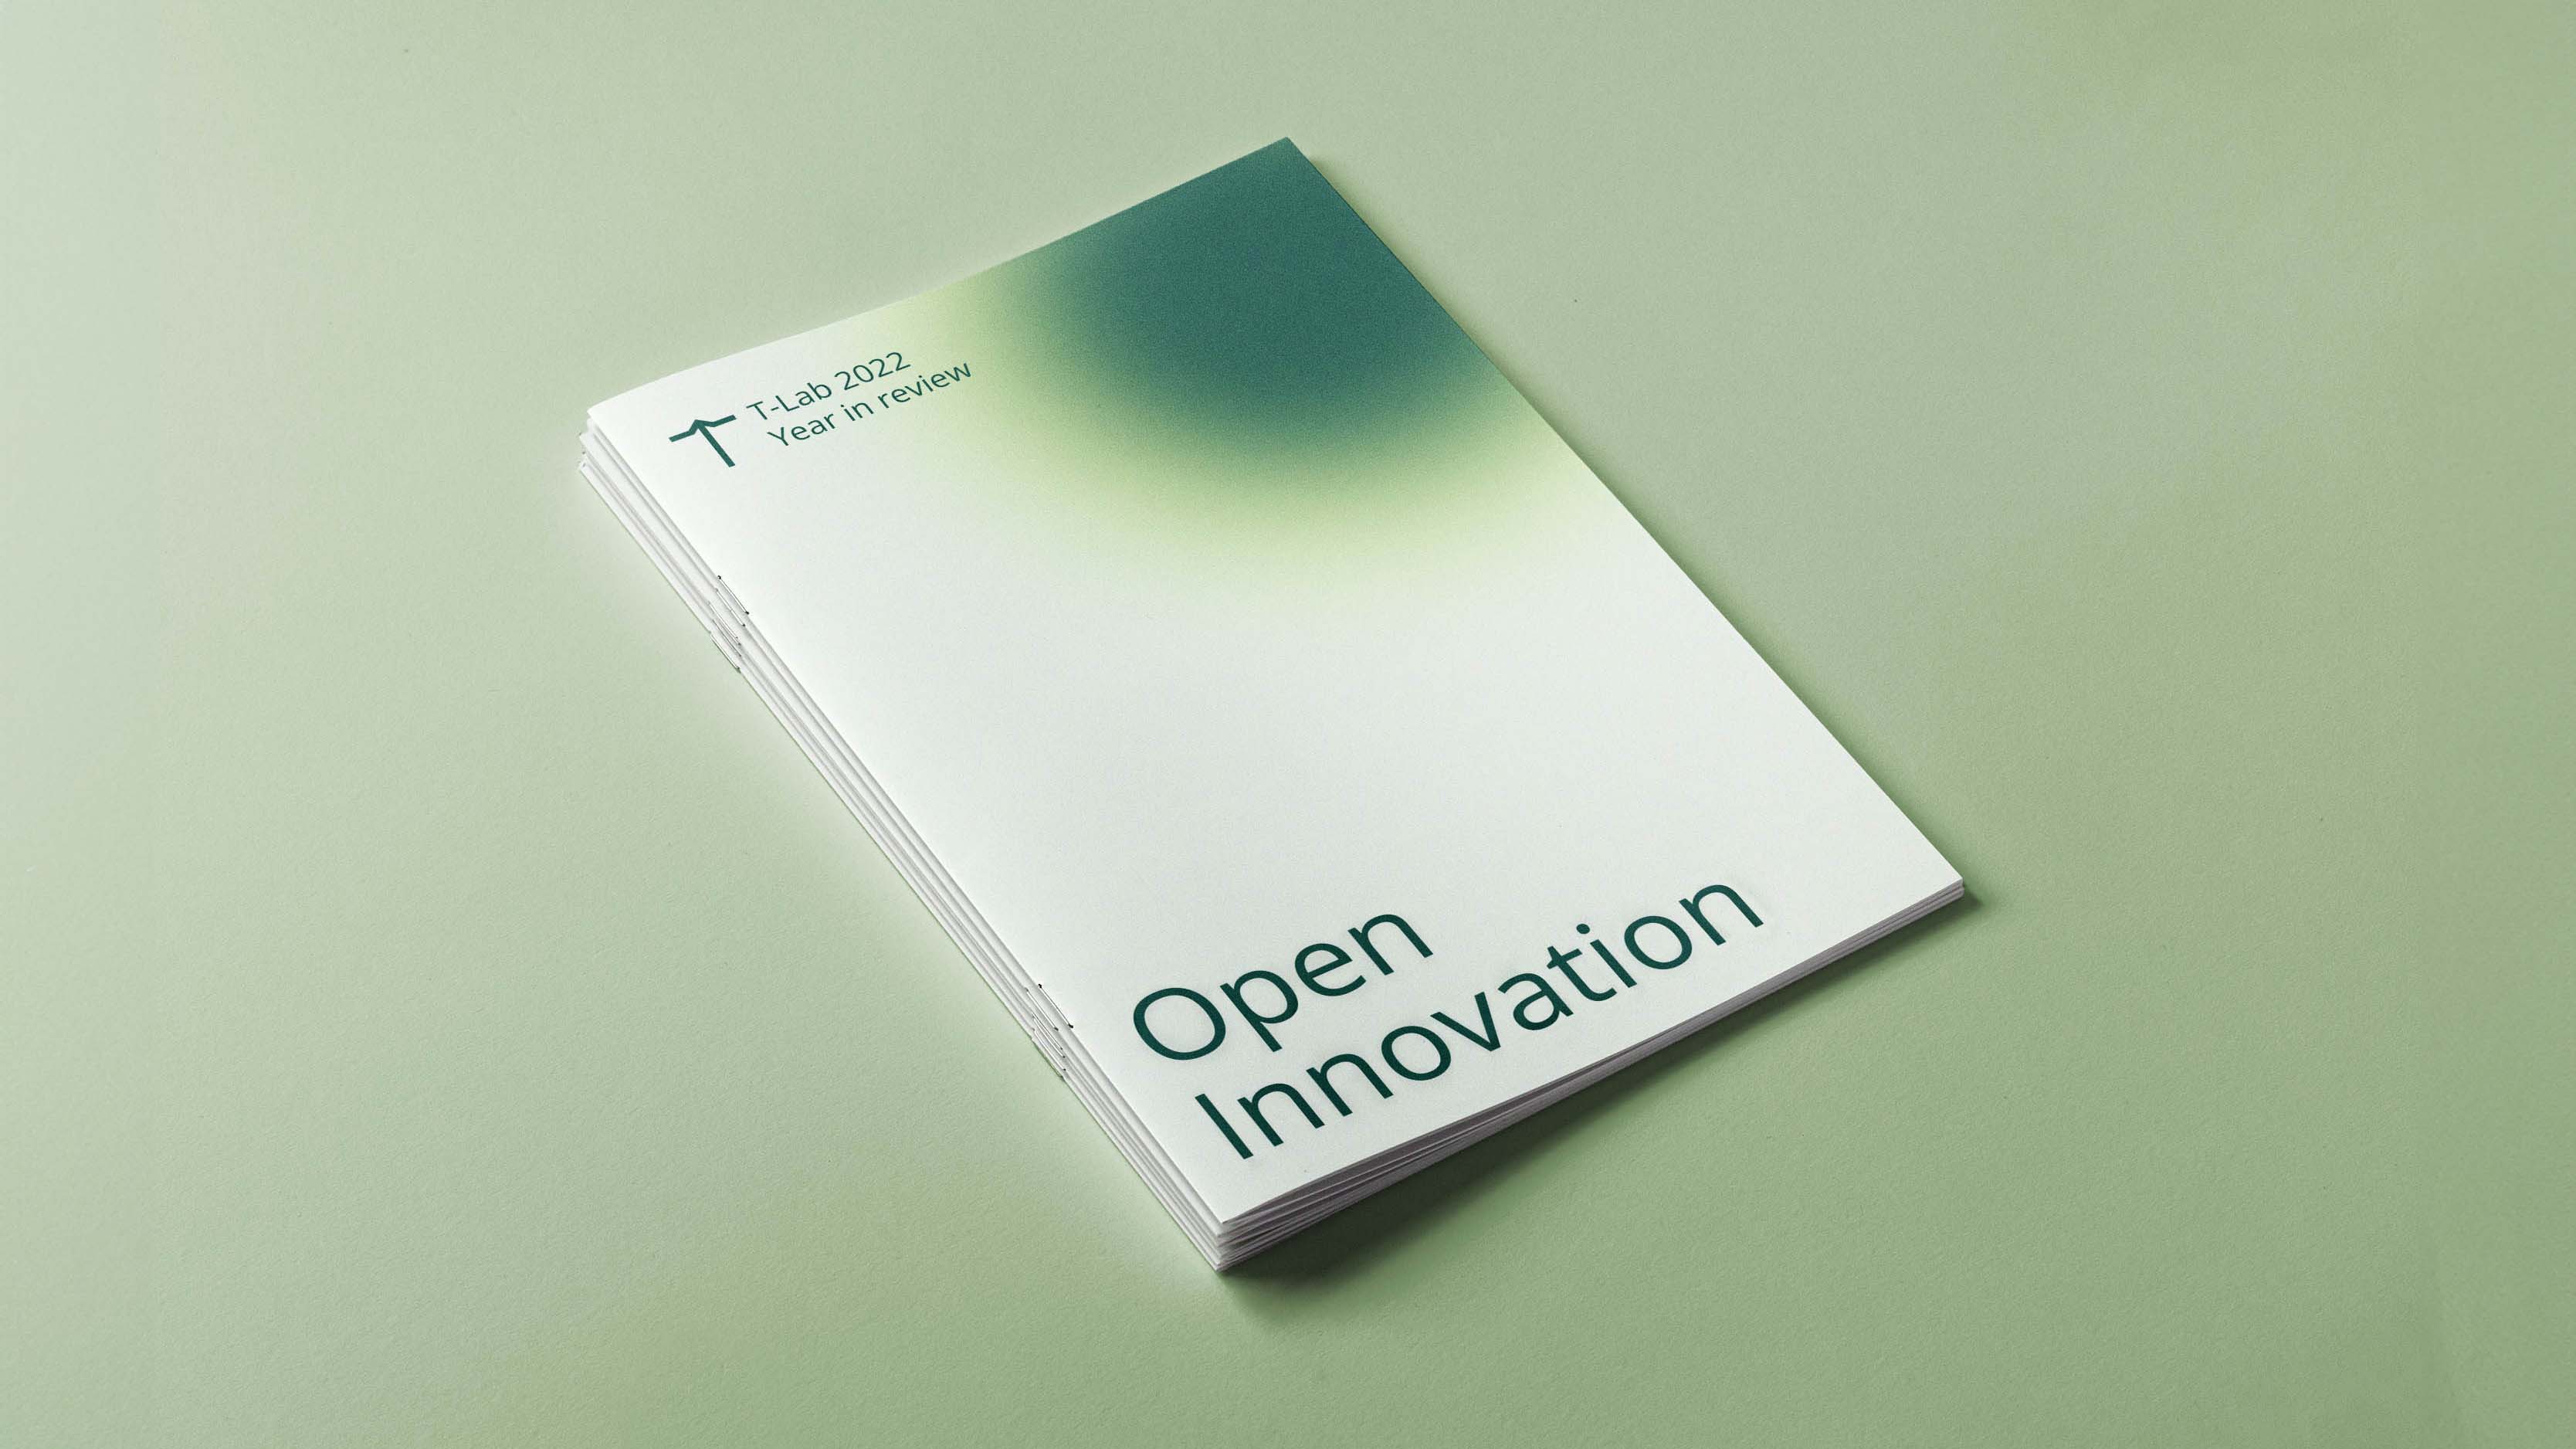 An annual report cover page for an innovation company